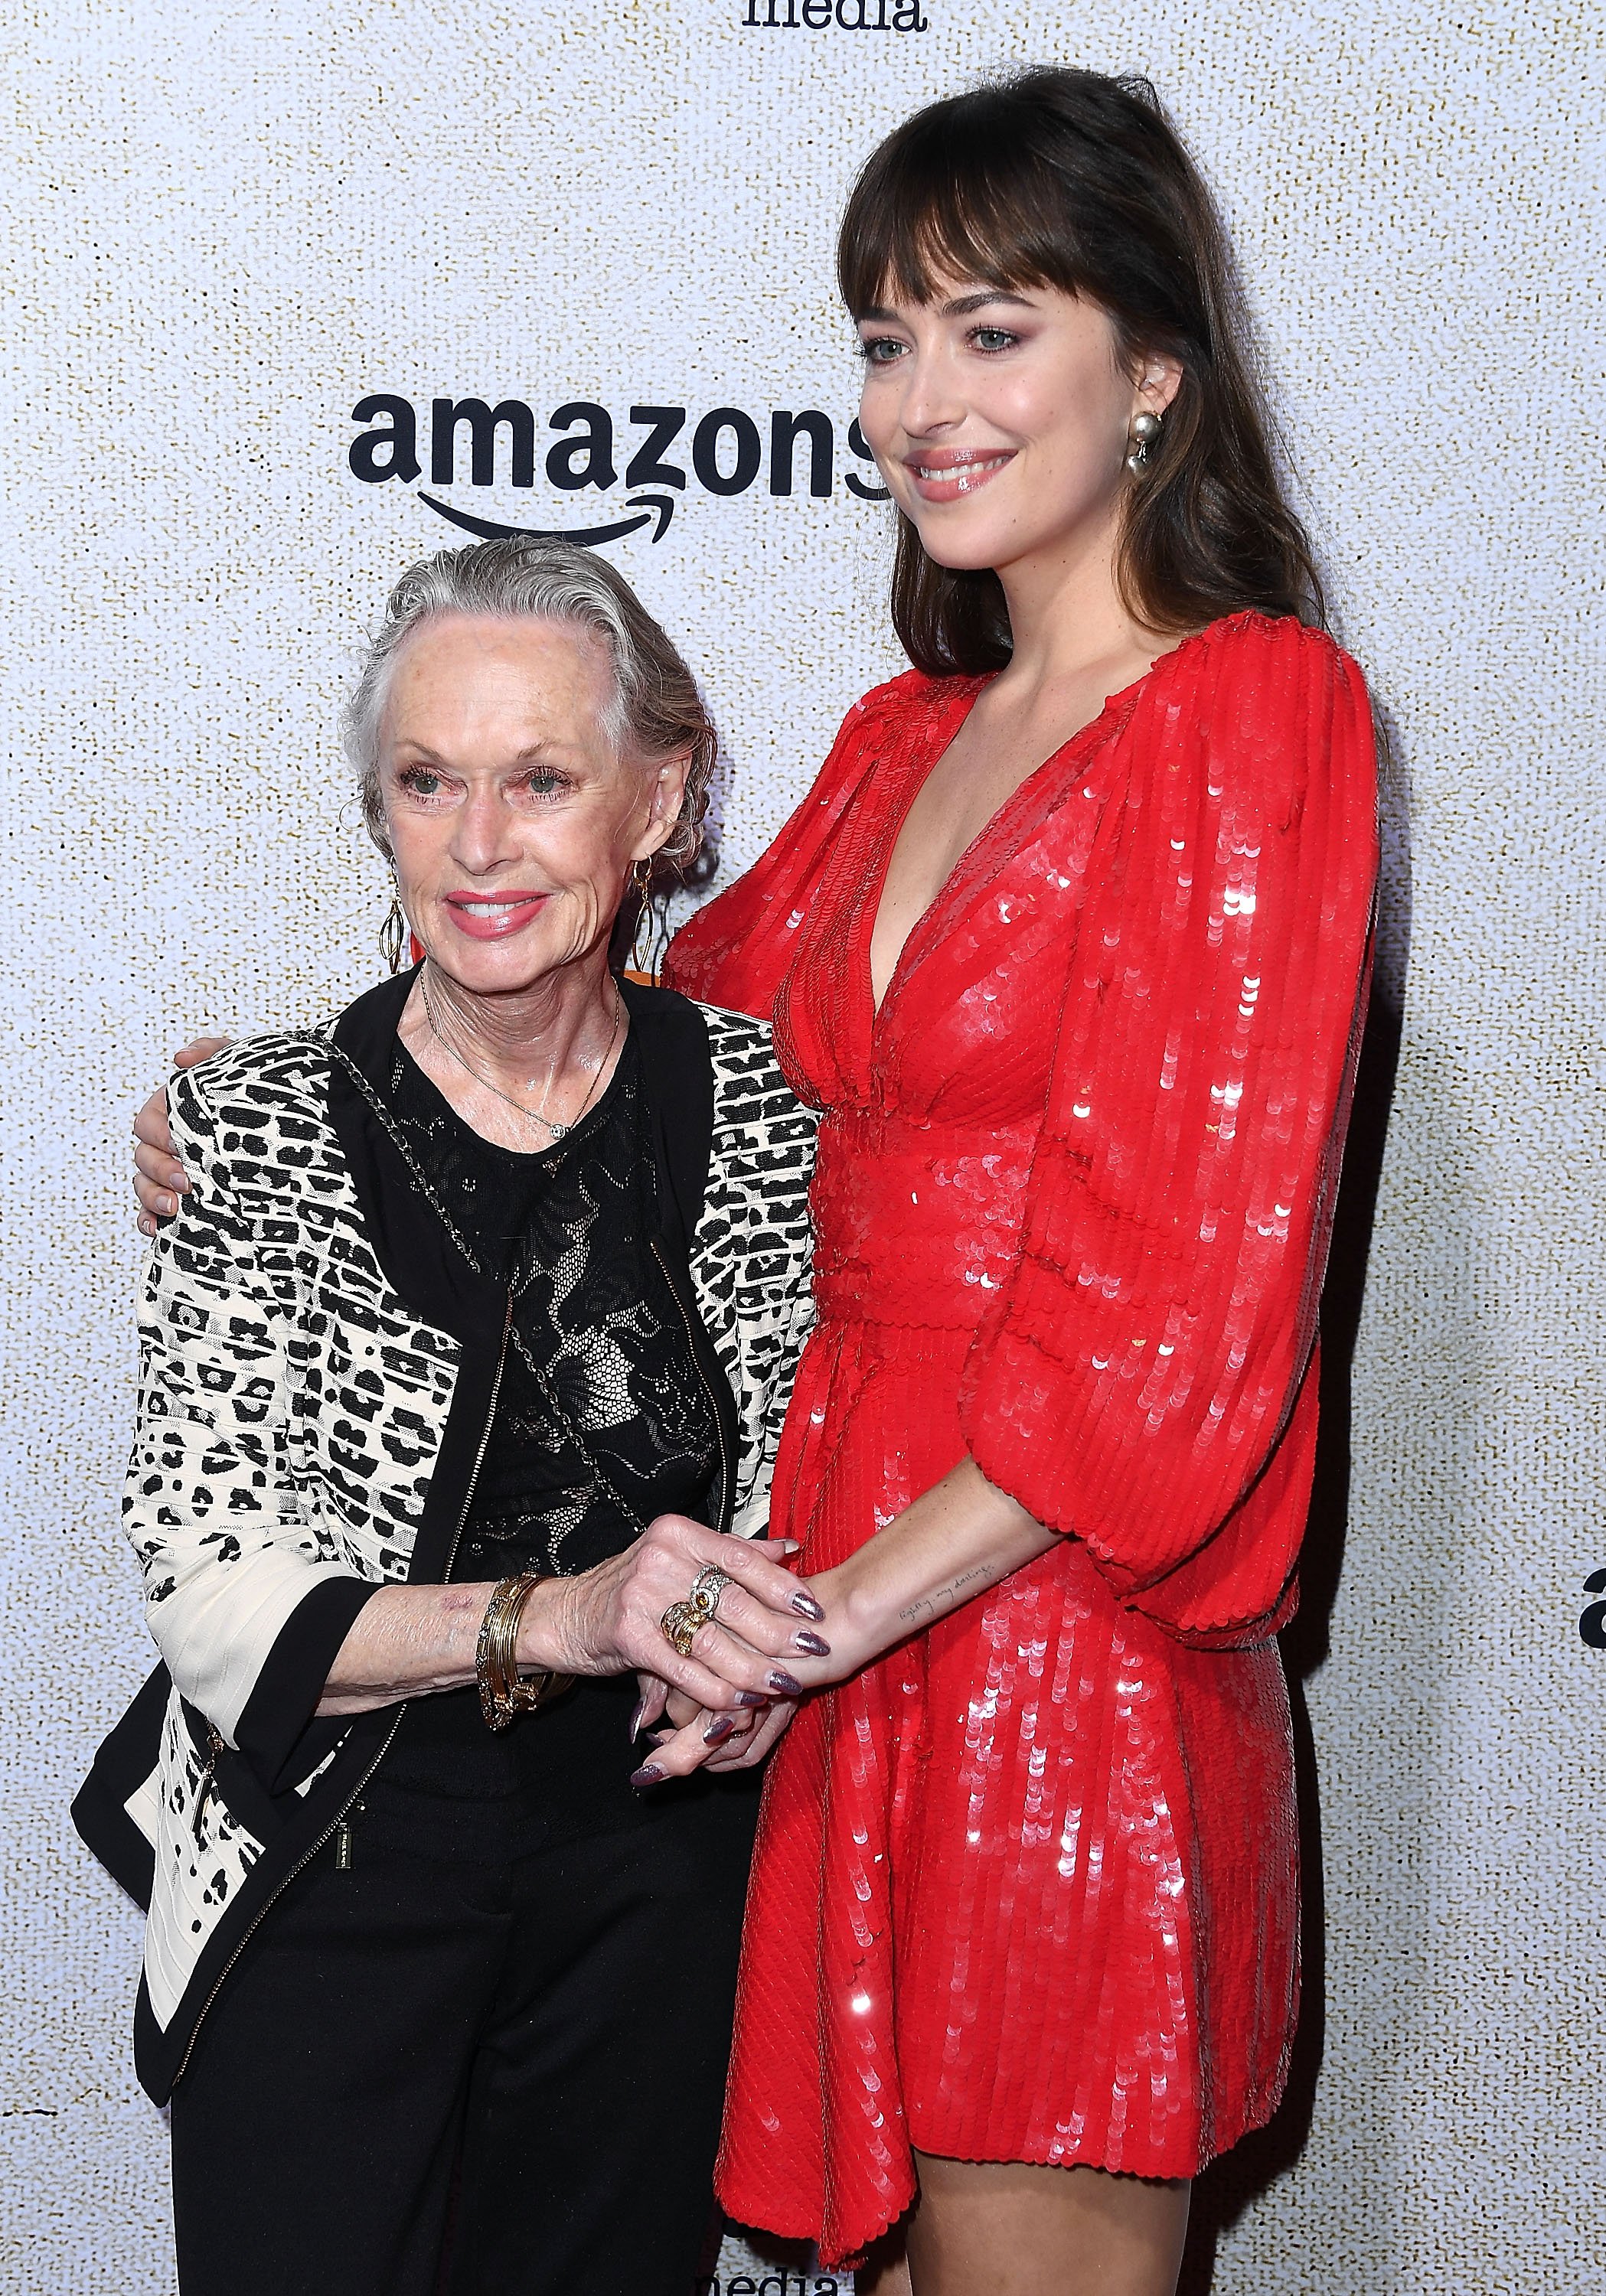 Tippi Hedren, Dakota Johnson arrives at the Premiere Of Amazon Studios' "Suspiria" at ArcLight Cinerama Dome on October 24, 2018 in Hollywood, California | Source: Getty Images 